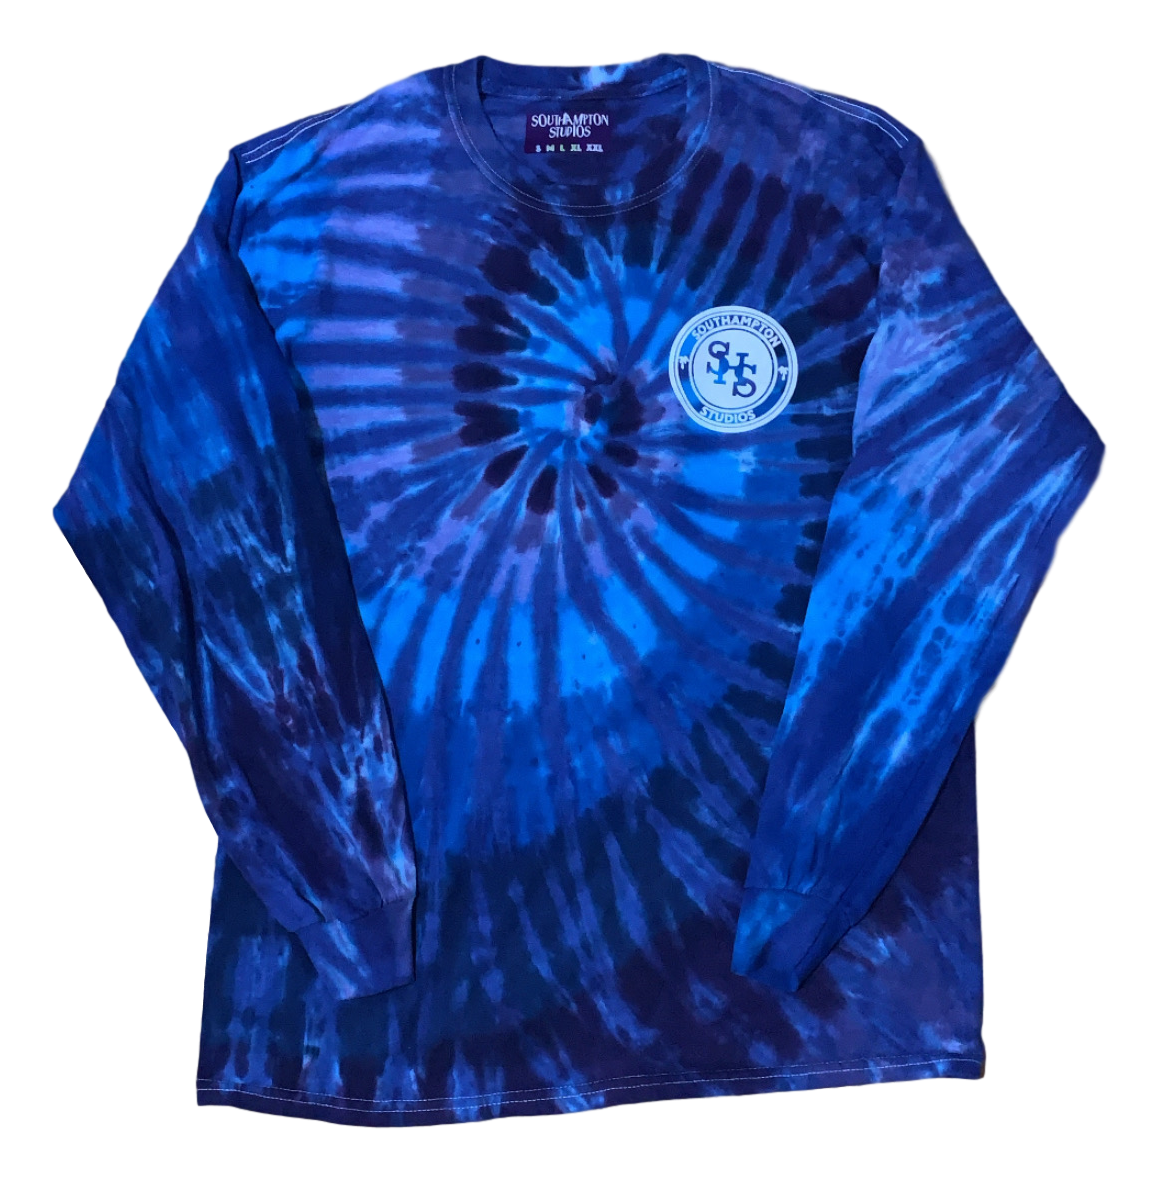 Rated S Long Sleeve (Blue Swirl)